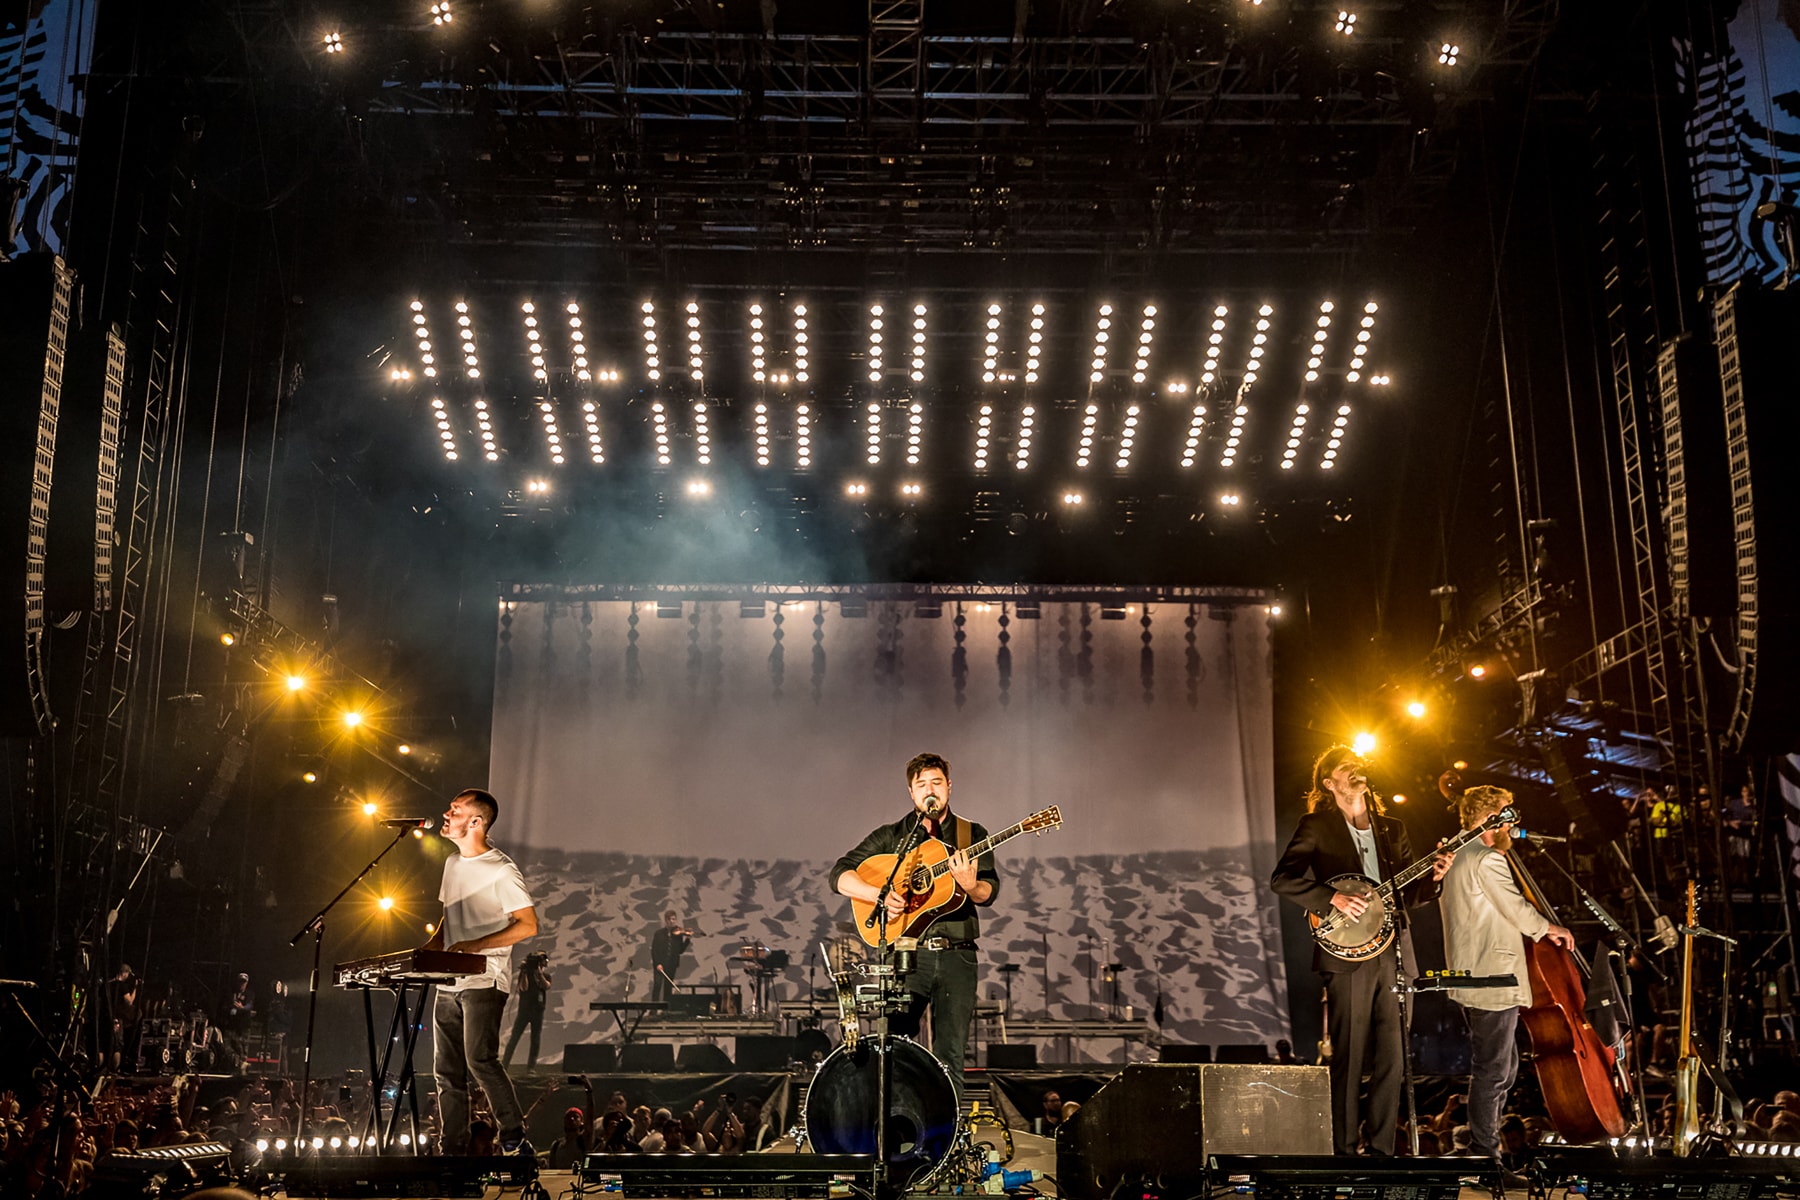 mumford & sons band onstage